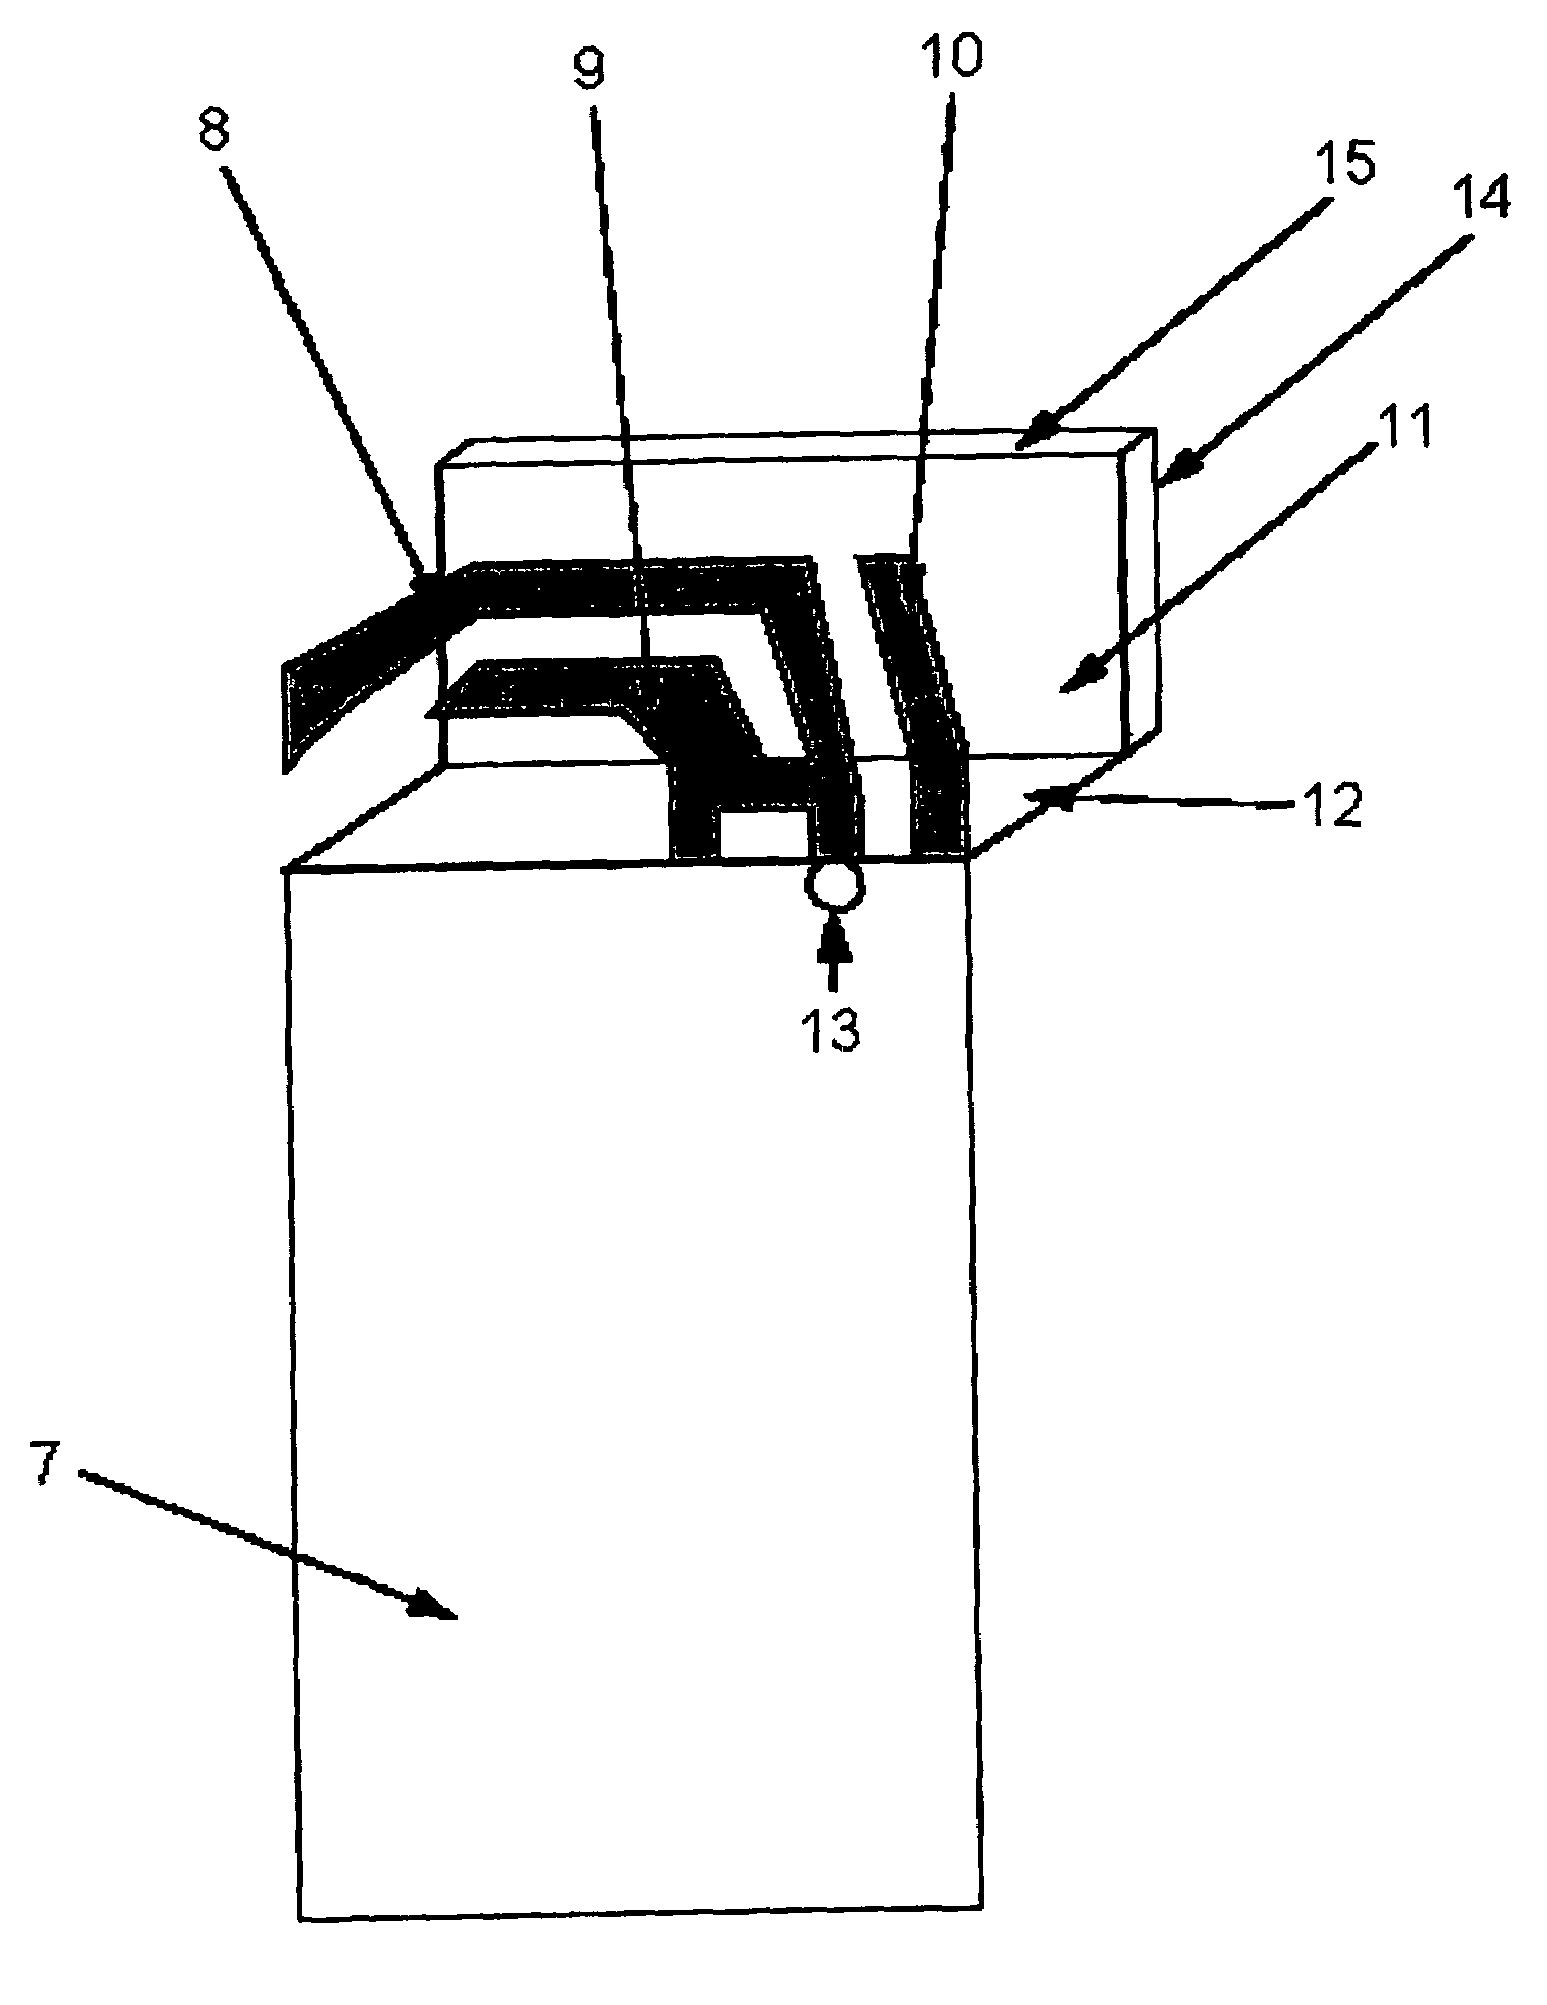 Printed built-in antenna for use in a portable electronic communication apparatus